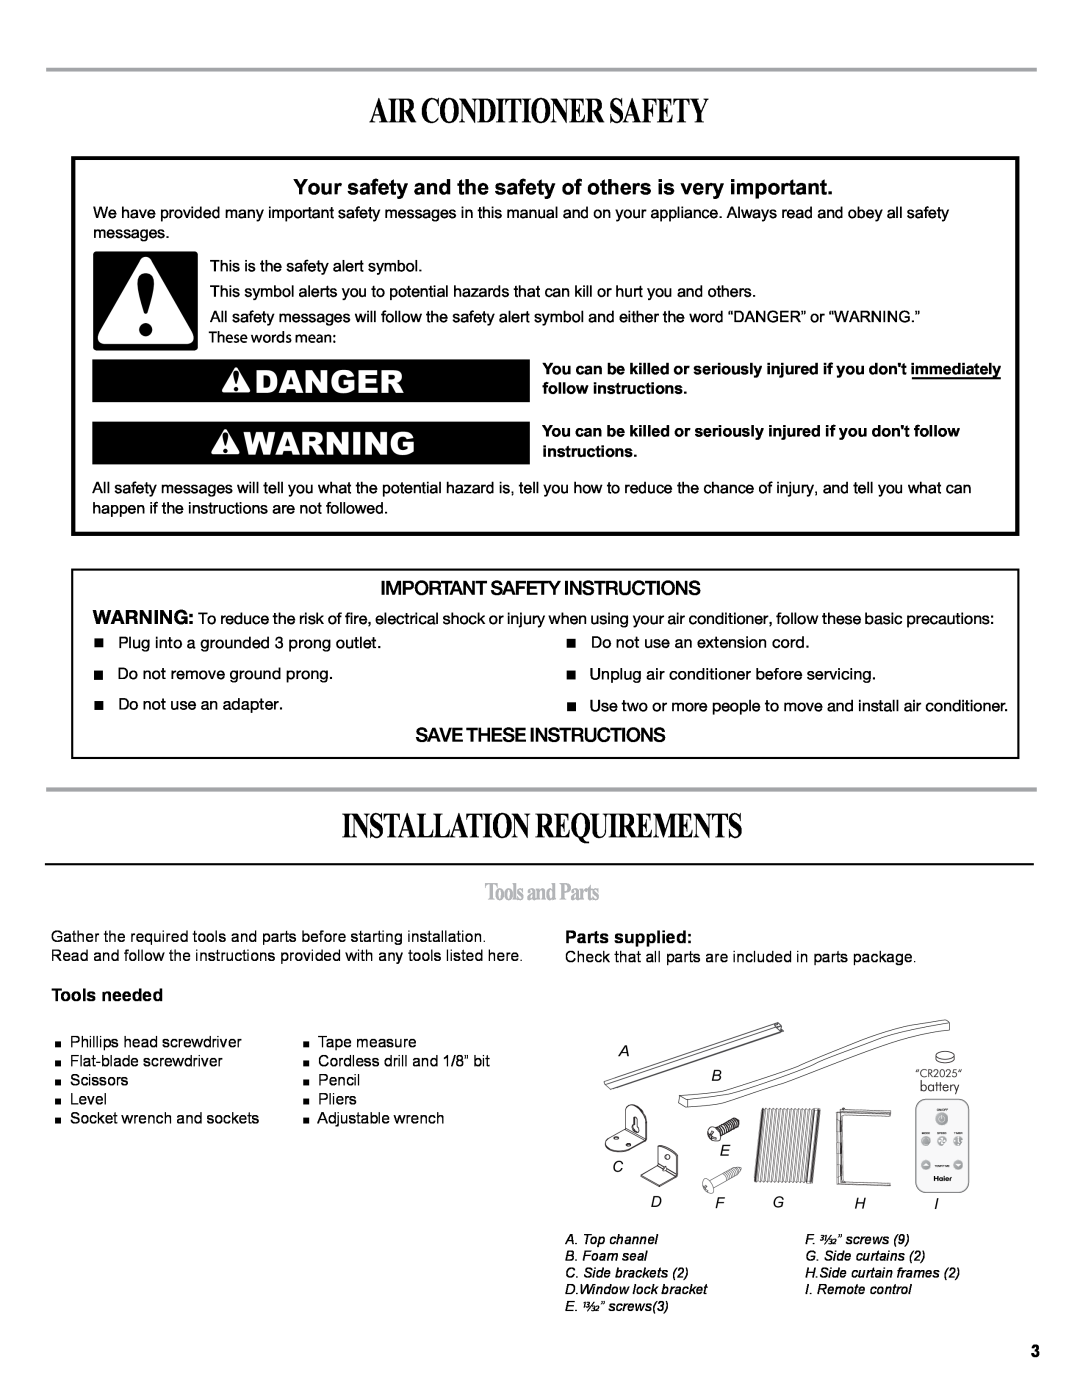 Haier 0010518358 Air Conditioner Safety, Installation Requirements, Danger Warning, ToolsandParts, Save These Instructions 